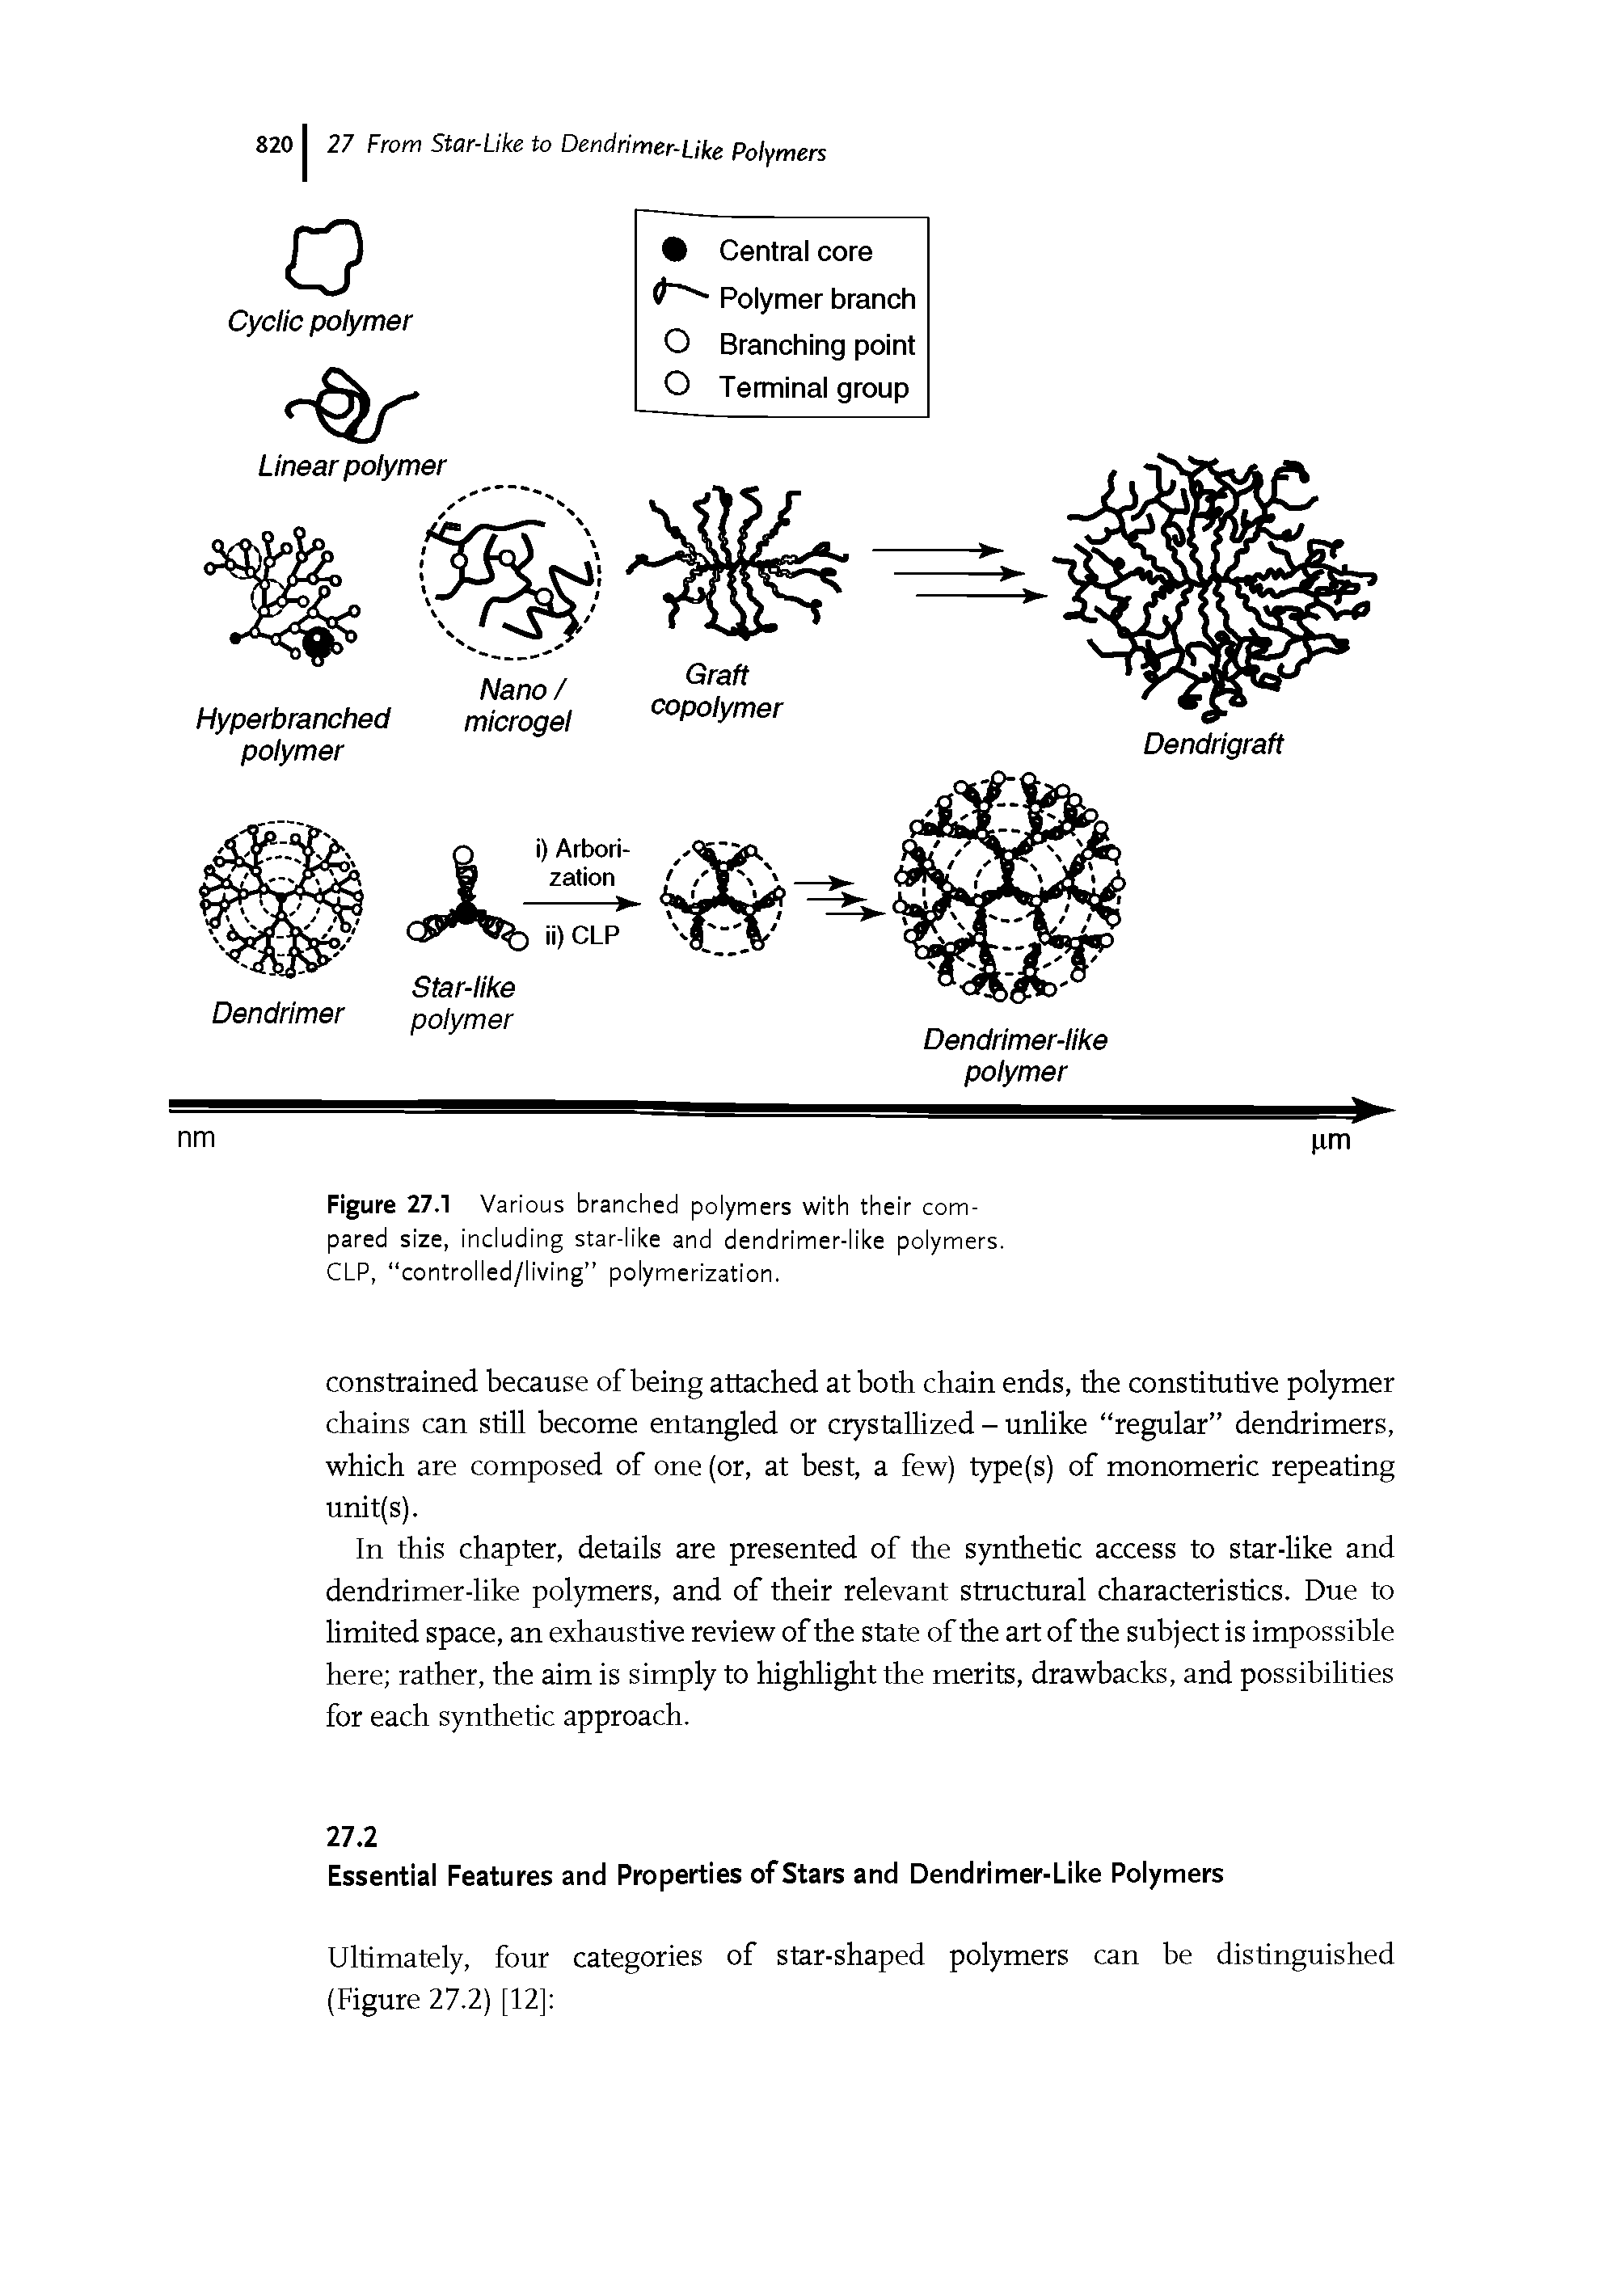 Figure 27.1 Various branched polymers with their compared size, including star-like and dendrimer-like polymers. CLP, controlled/living polymerization.